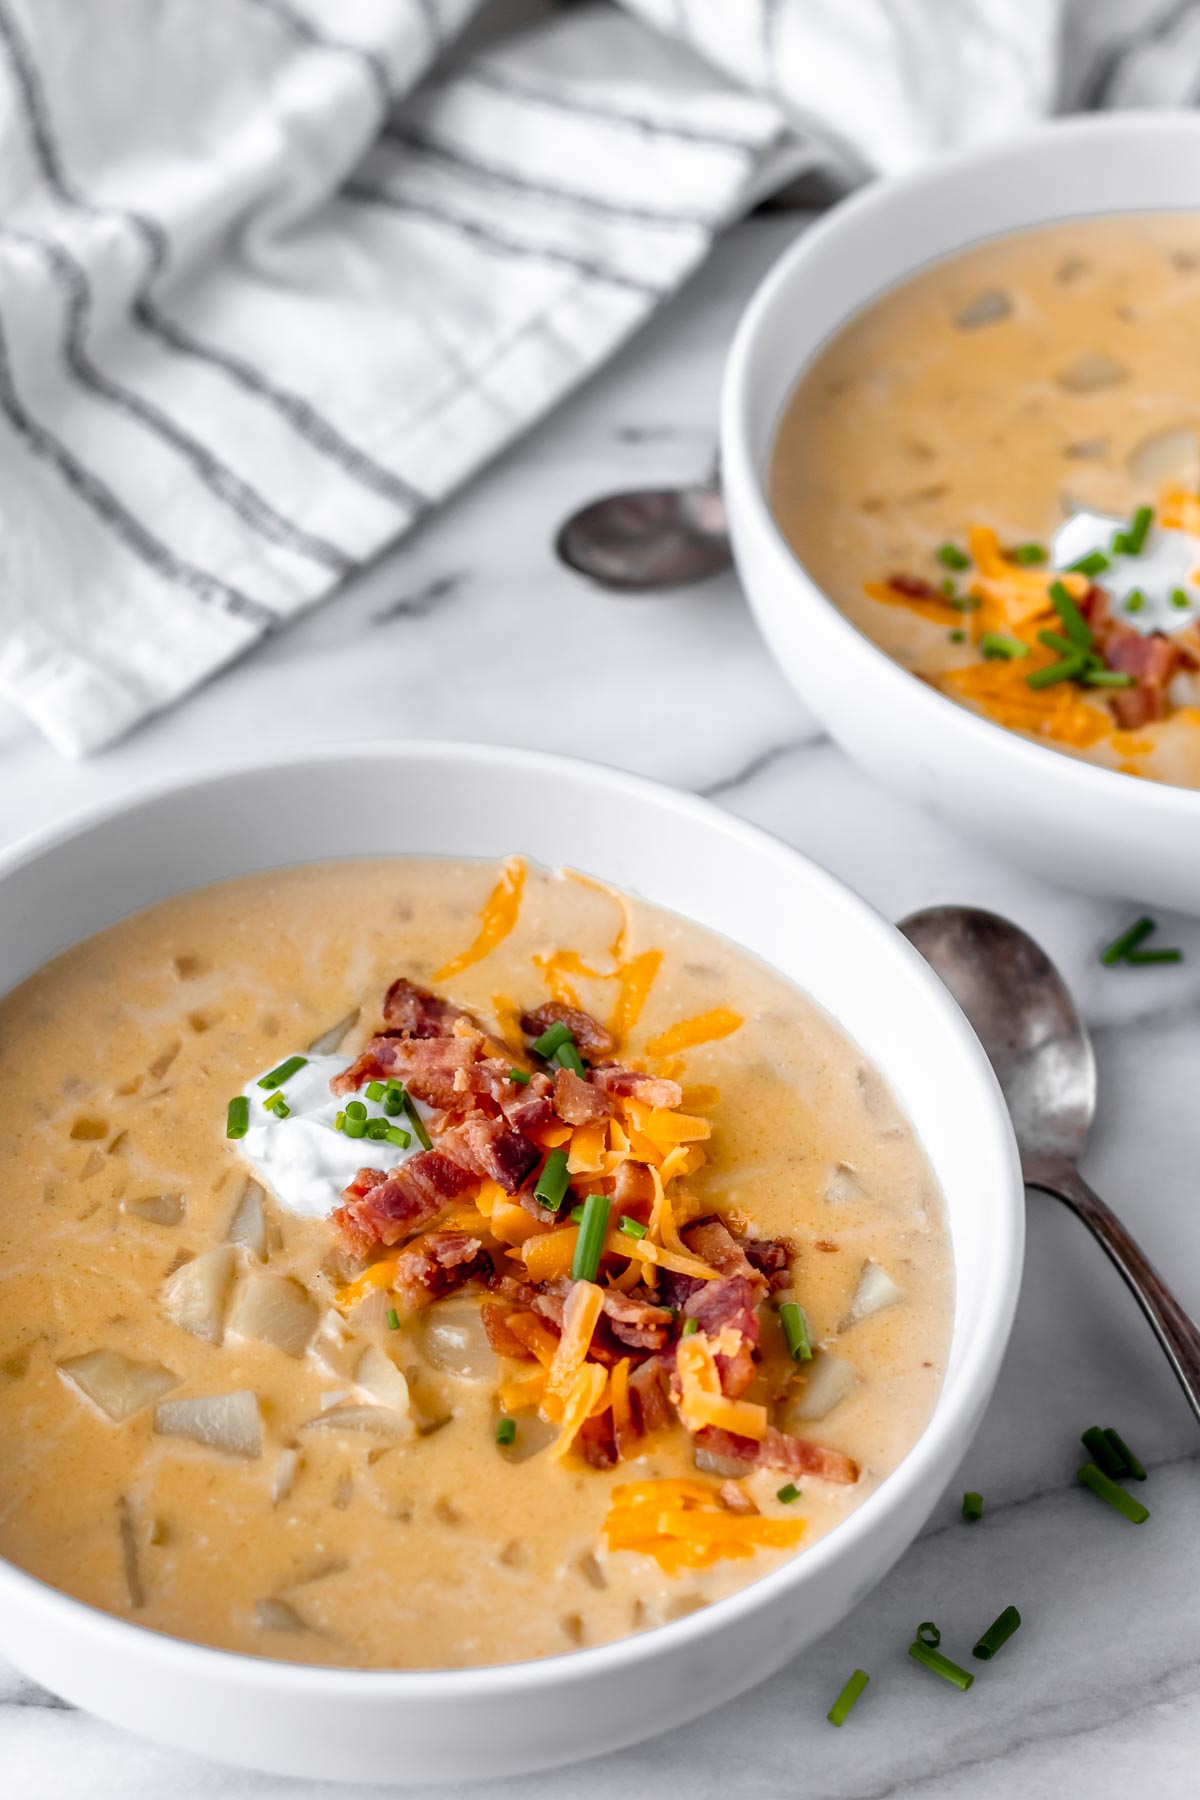 Two bowls of loaded potato soup with spoons and a striped towel near them.